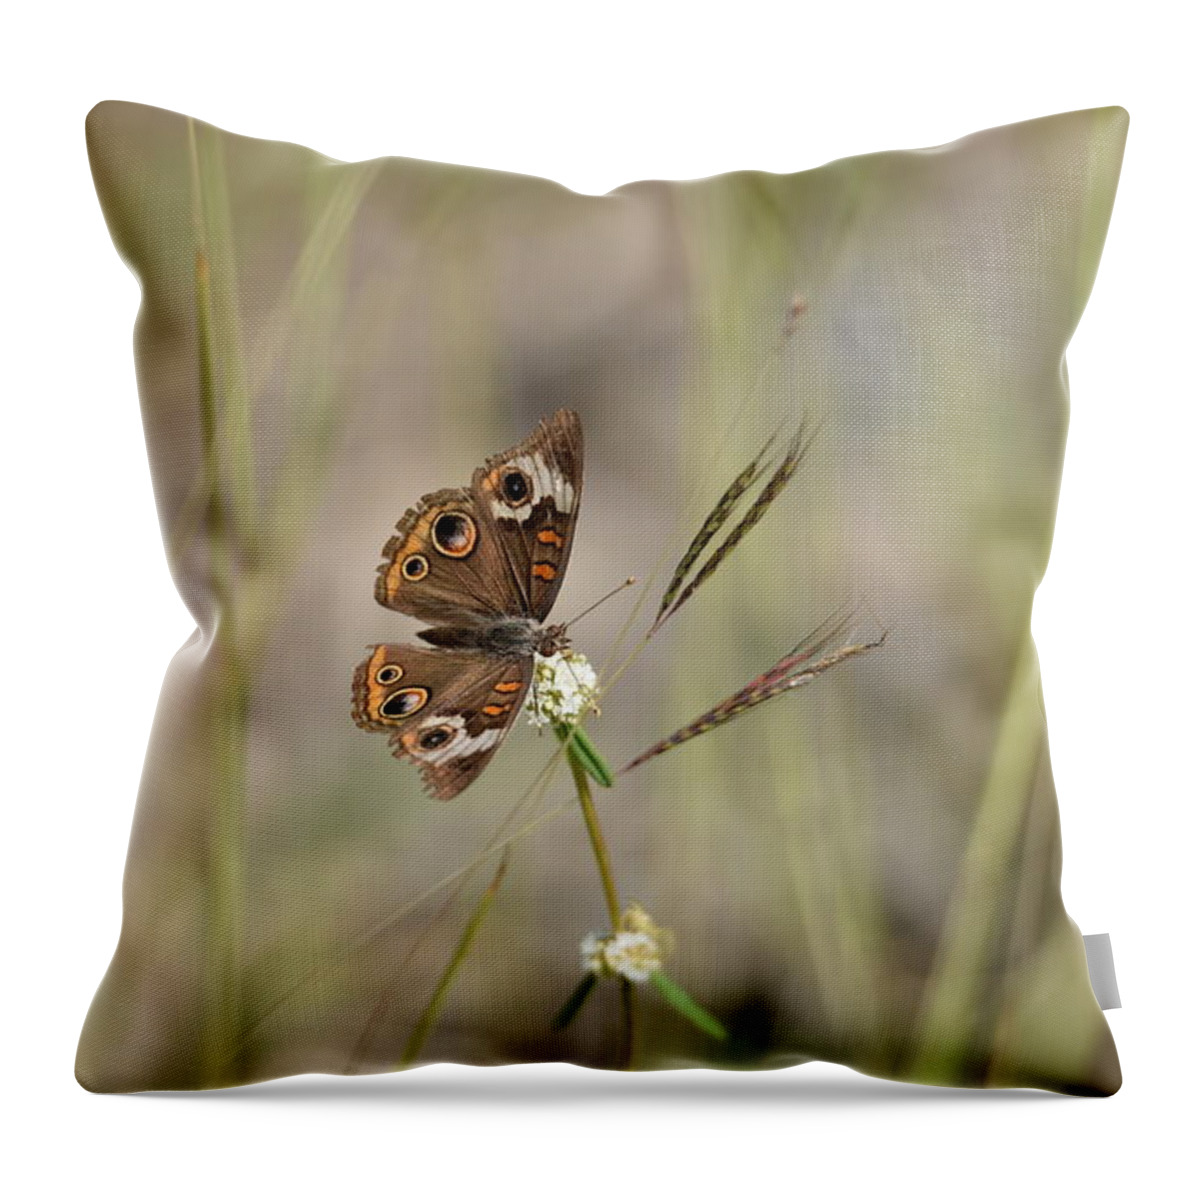 Butterfly Throw Pillow featuring the photograph Buckeye Butterfly Resting On White Flowers - Horizontal by Artful Imagery